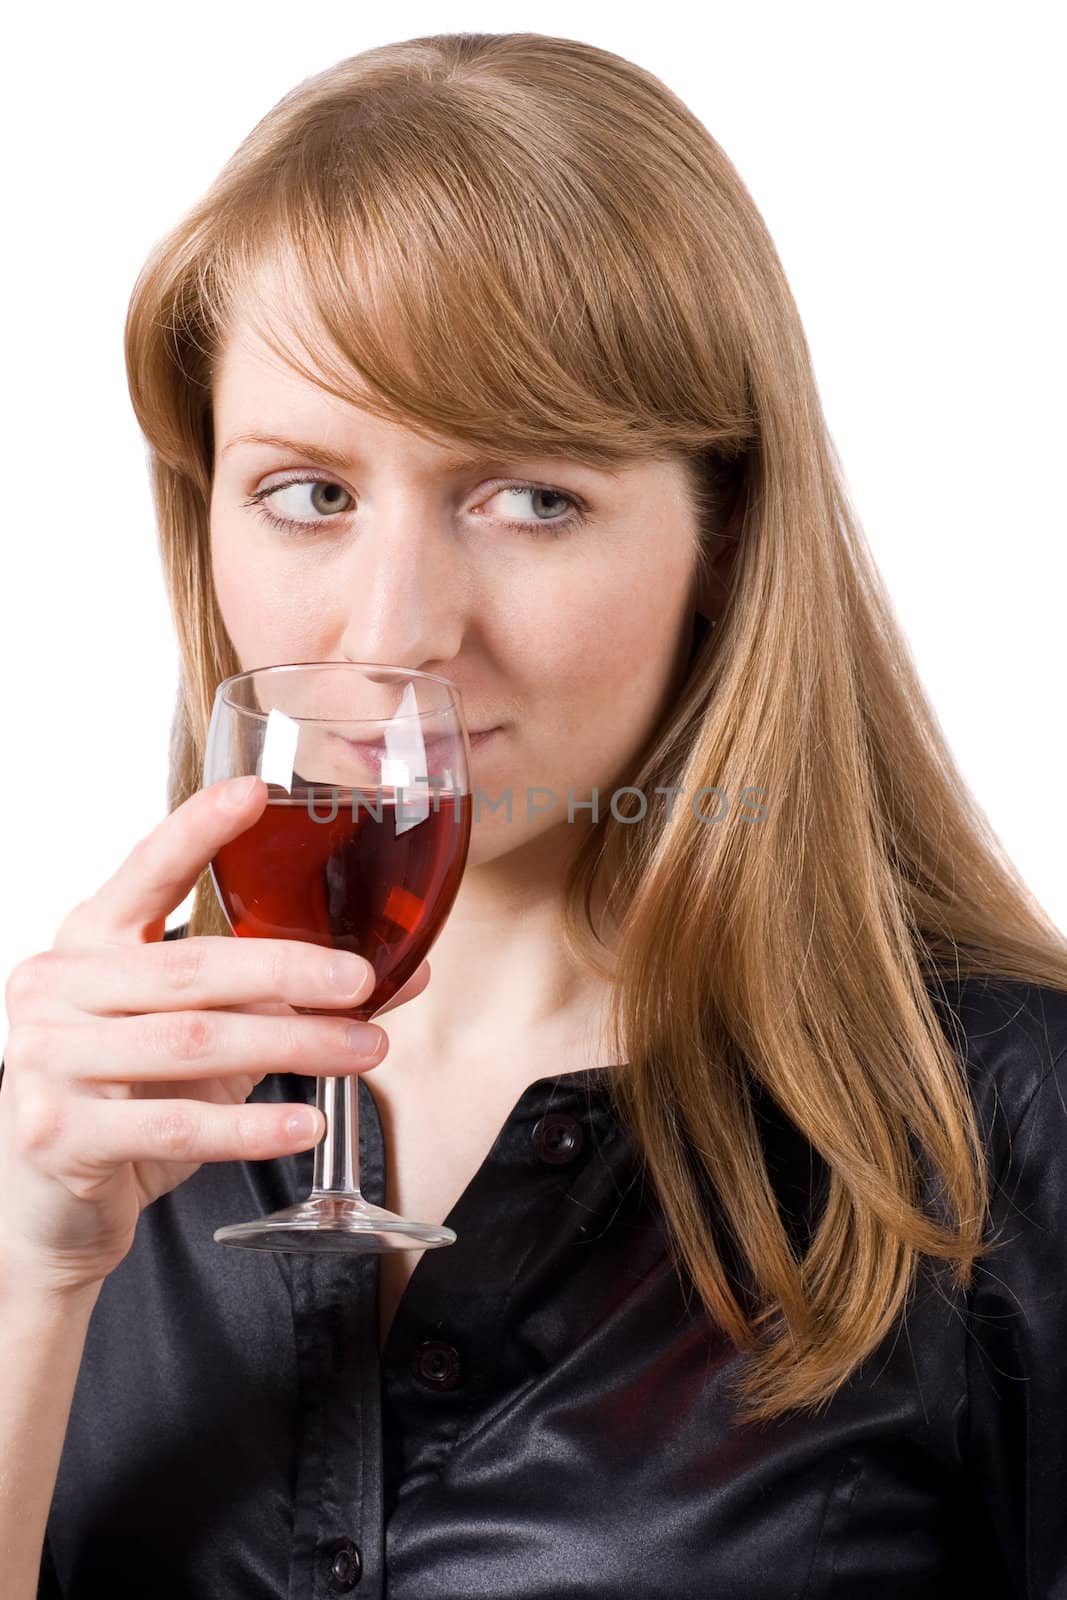 Young woman tasting a glass of wine. #1 by Amidos